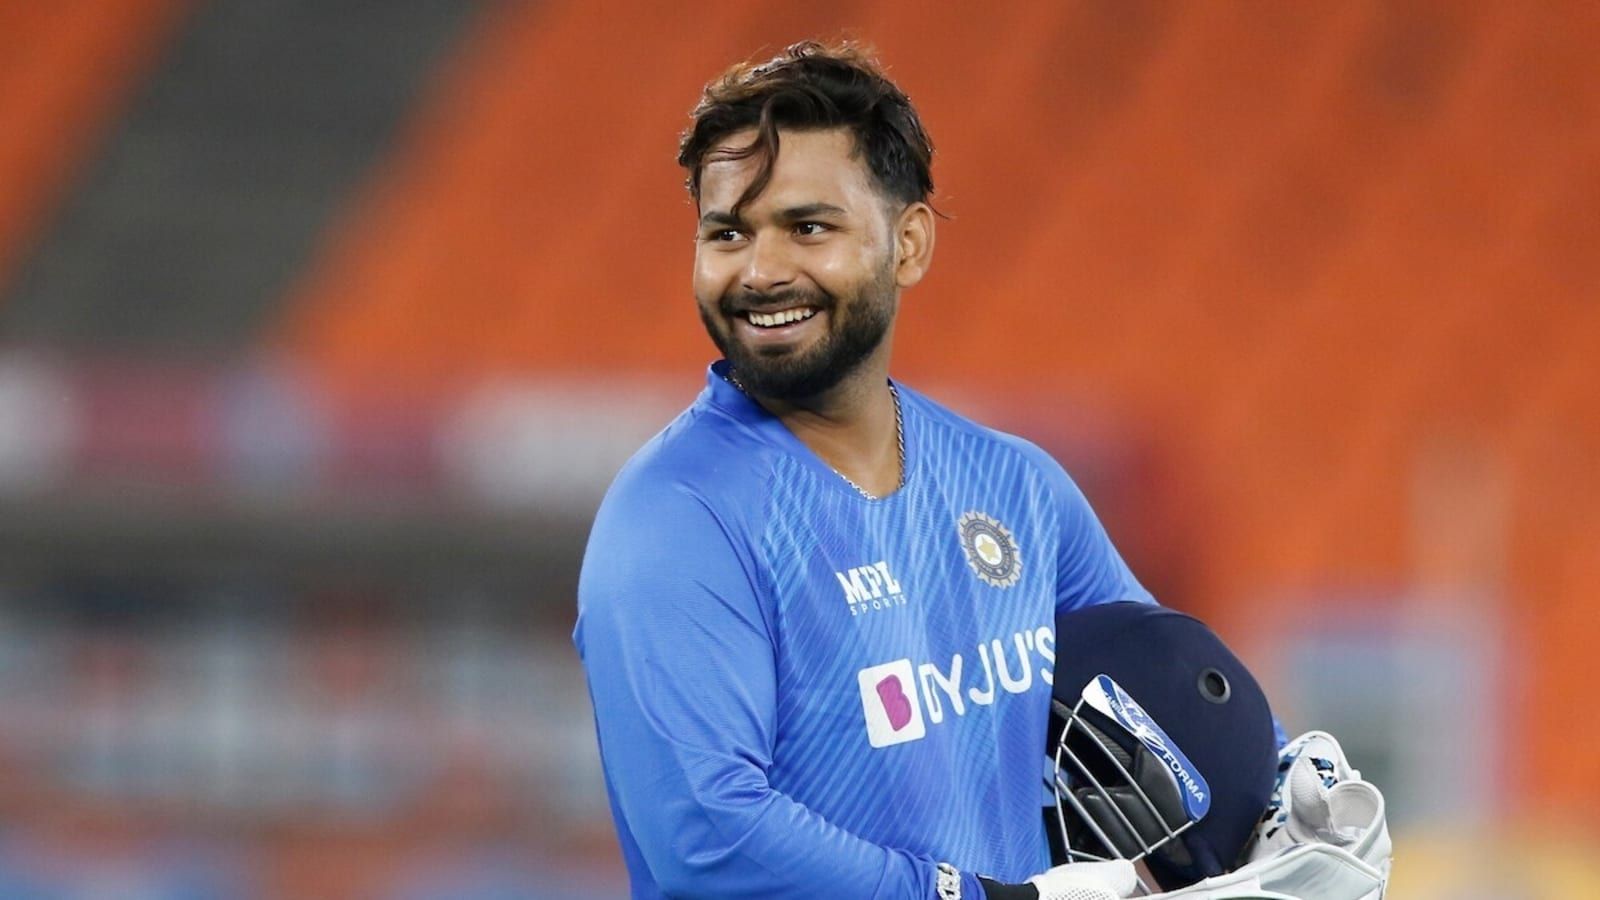 Rishabh Pant was elevated to Indian captaincy following an injury to KL Rahul on Wednesday.